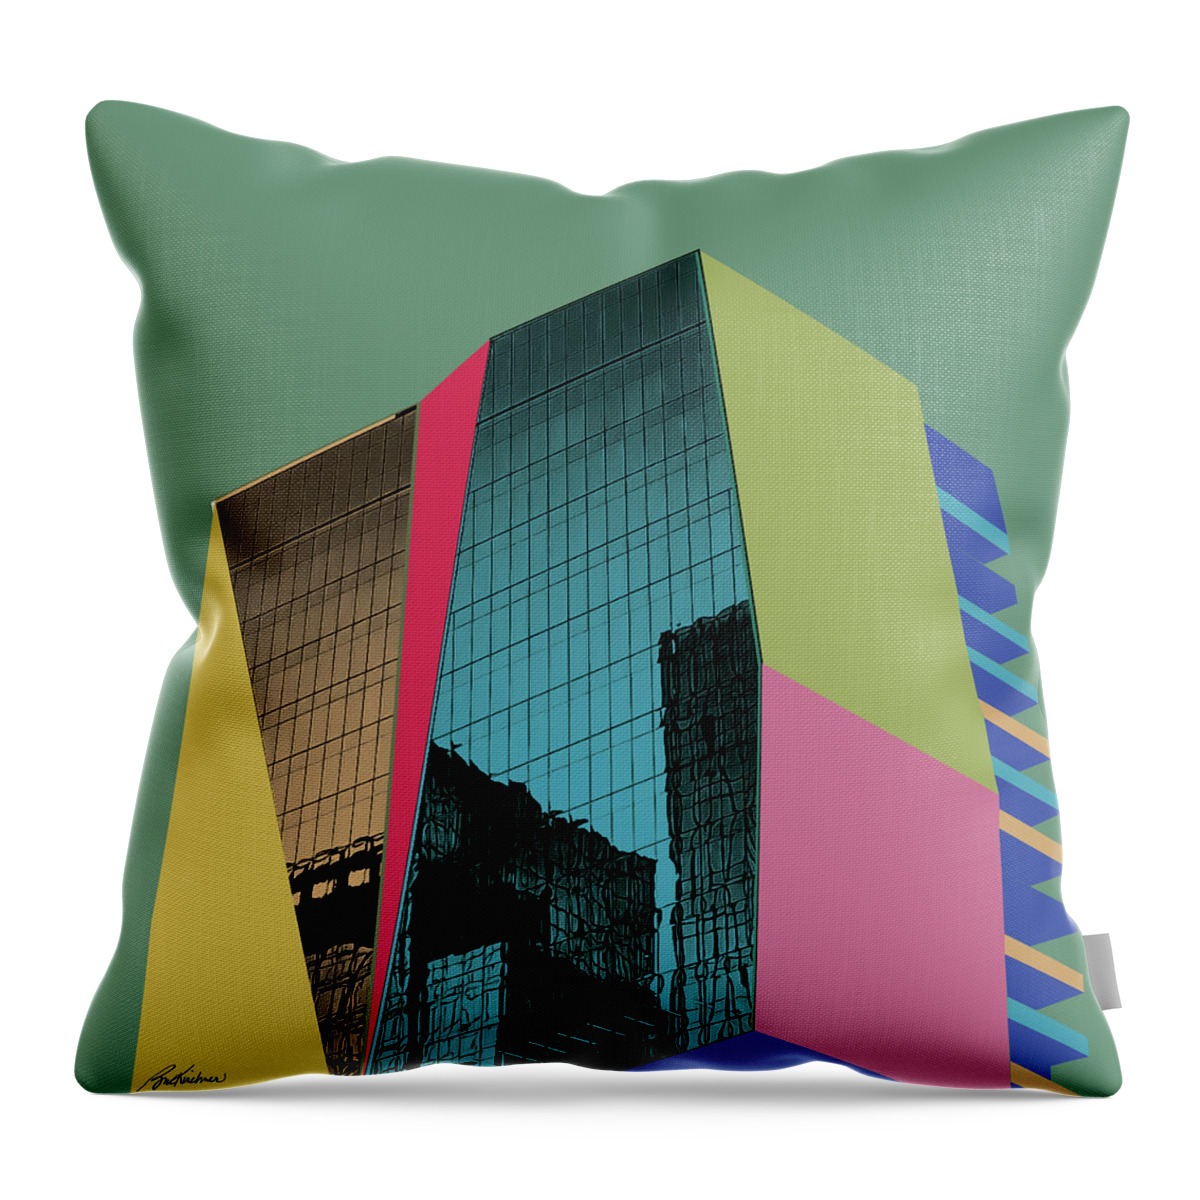 Square Art Throw Pillow featuring the digital art ATX The Molar by Brian Kirchner